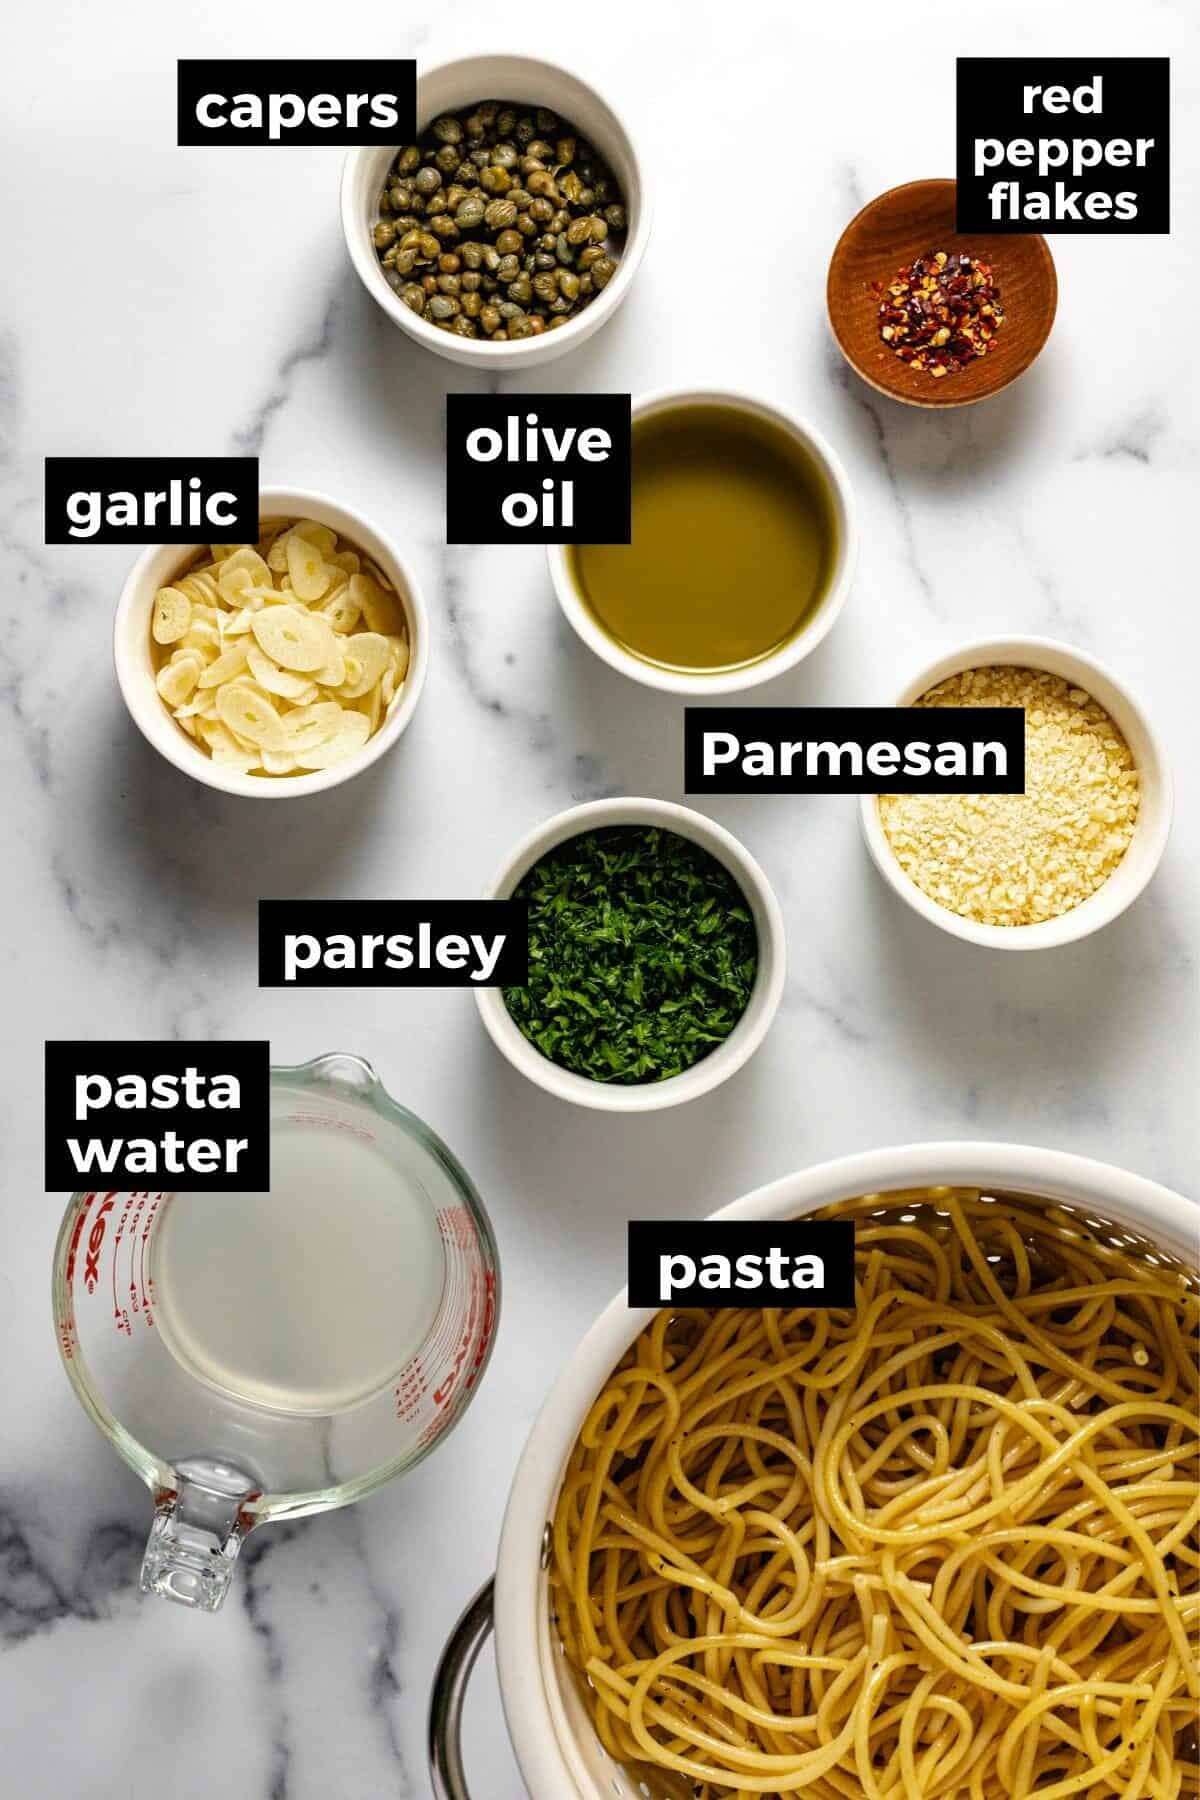 White marble countertop with bowls of ingredients to make olive oil pasta